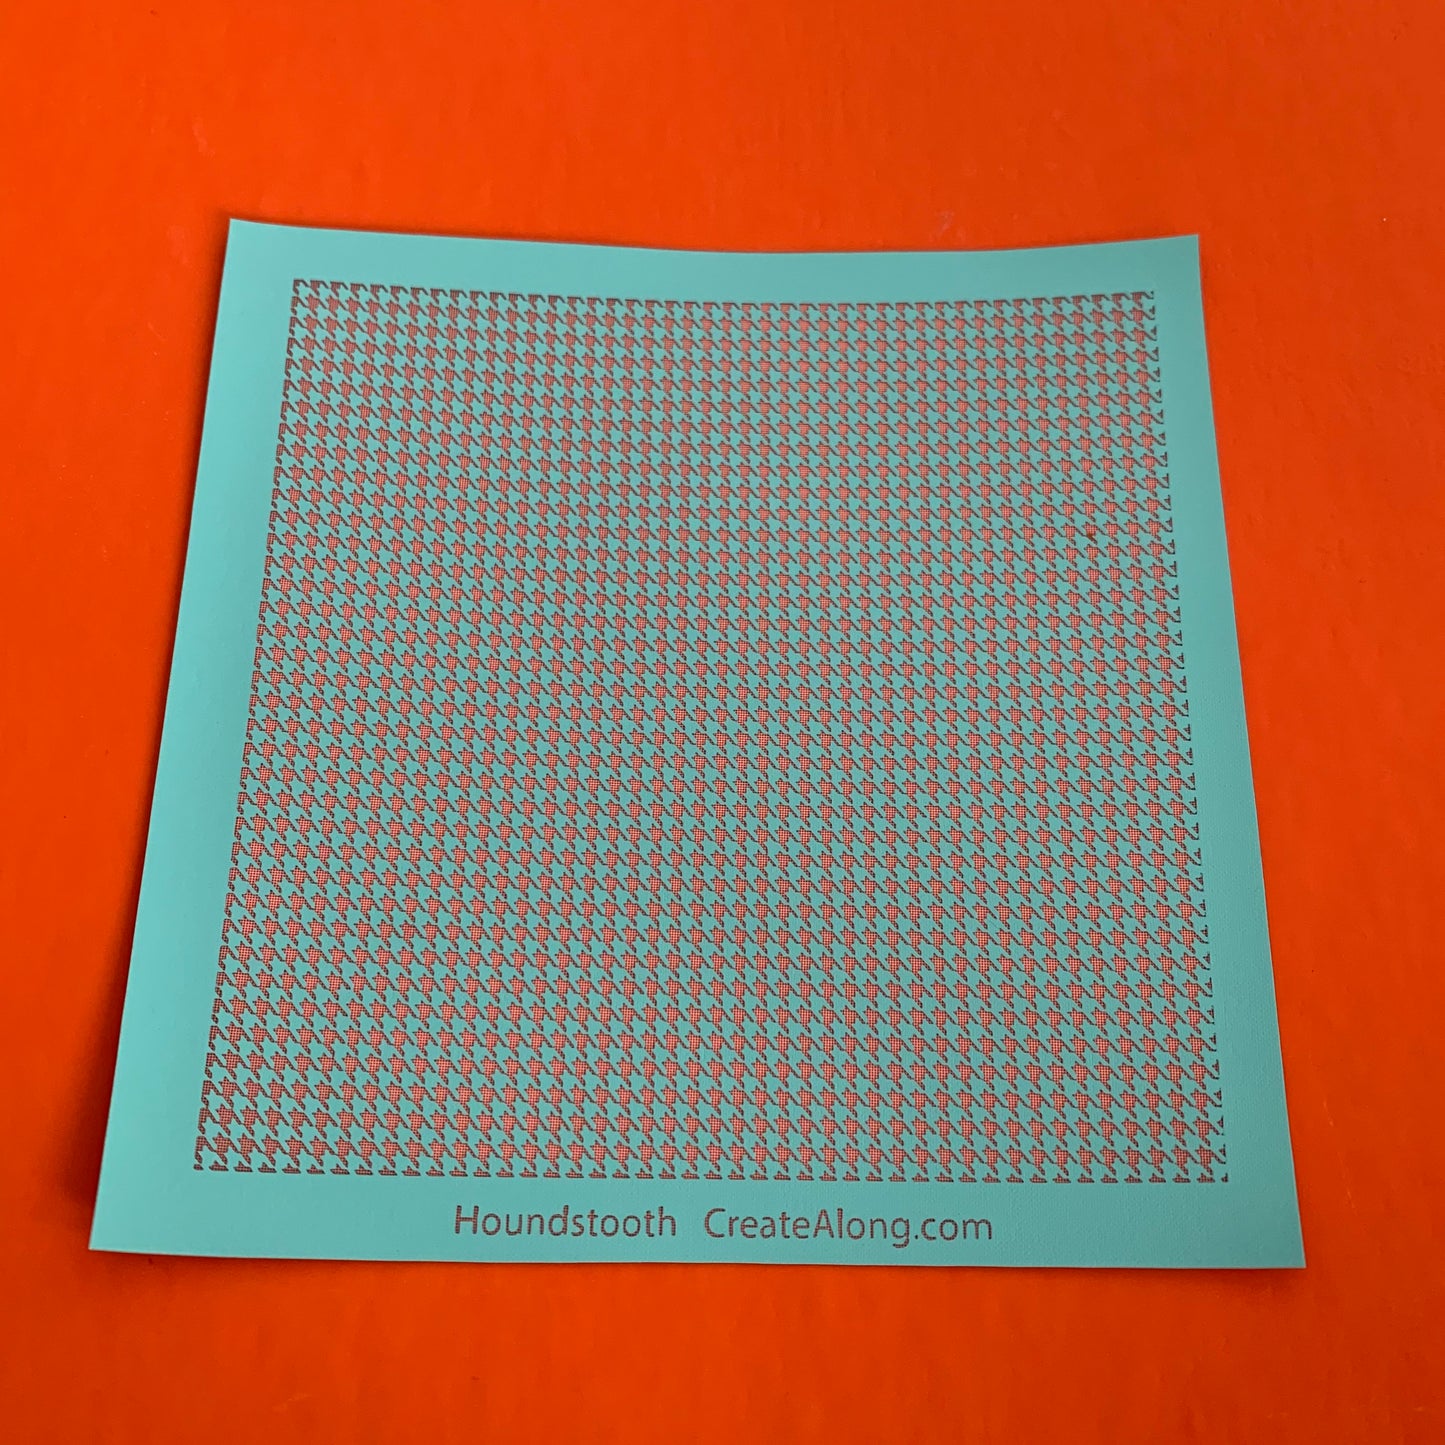 Silkscreen Houndstooth Stencil for Polymer Clay, Art Jewelry and Mixed Media